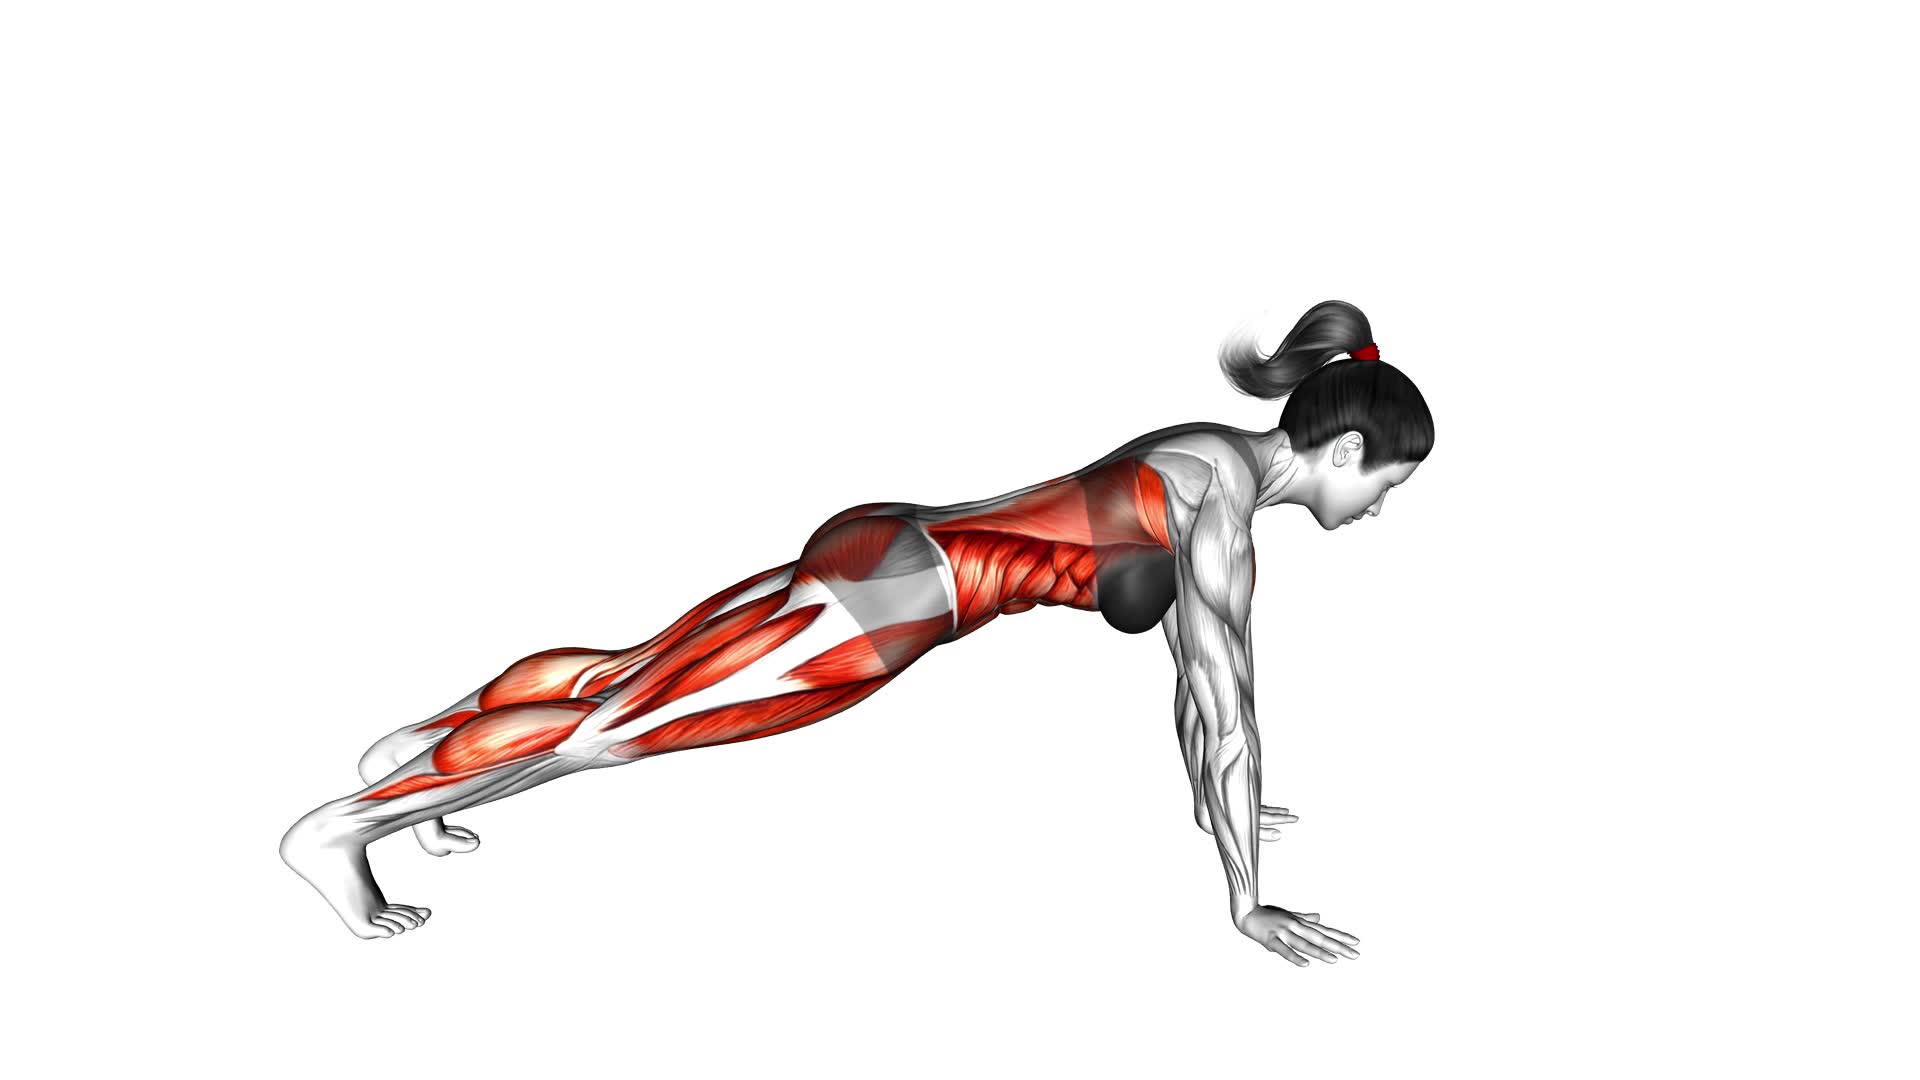 Front Plank With Arm and Leg Lift (Push-Up Position) (Female) - Video Exercise Guide & Tips